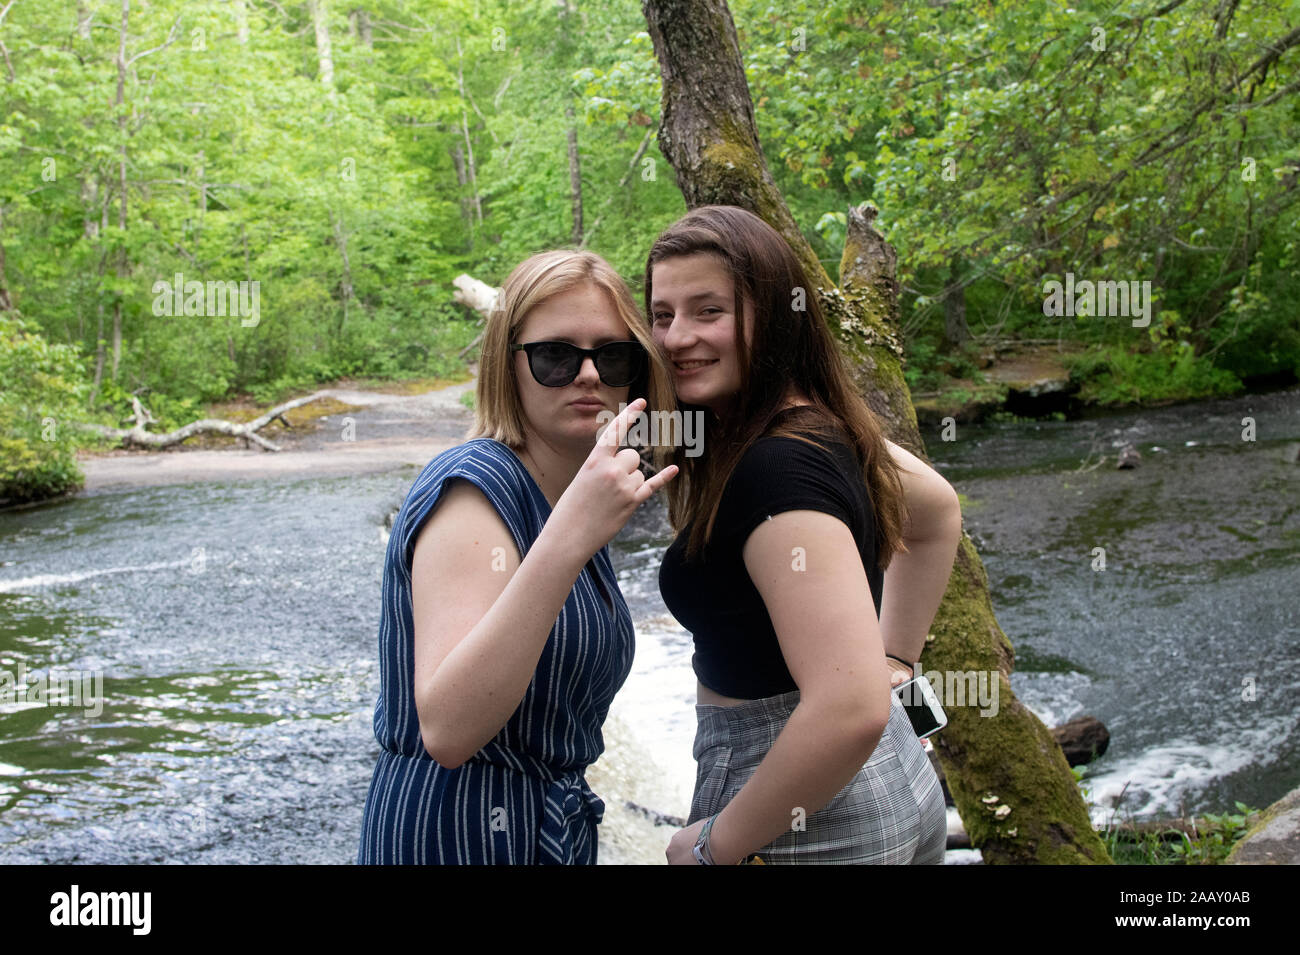 Two girls taking a selfie Stock Photo